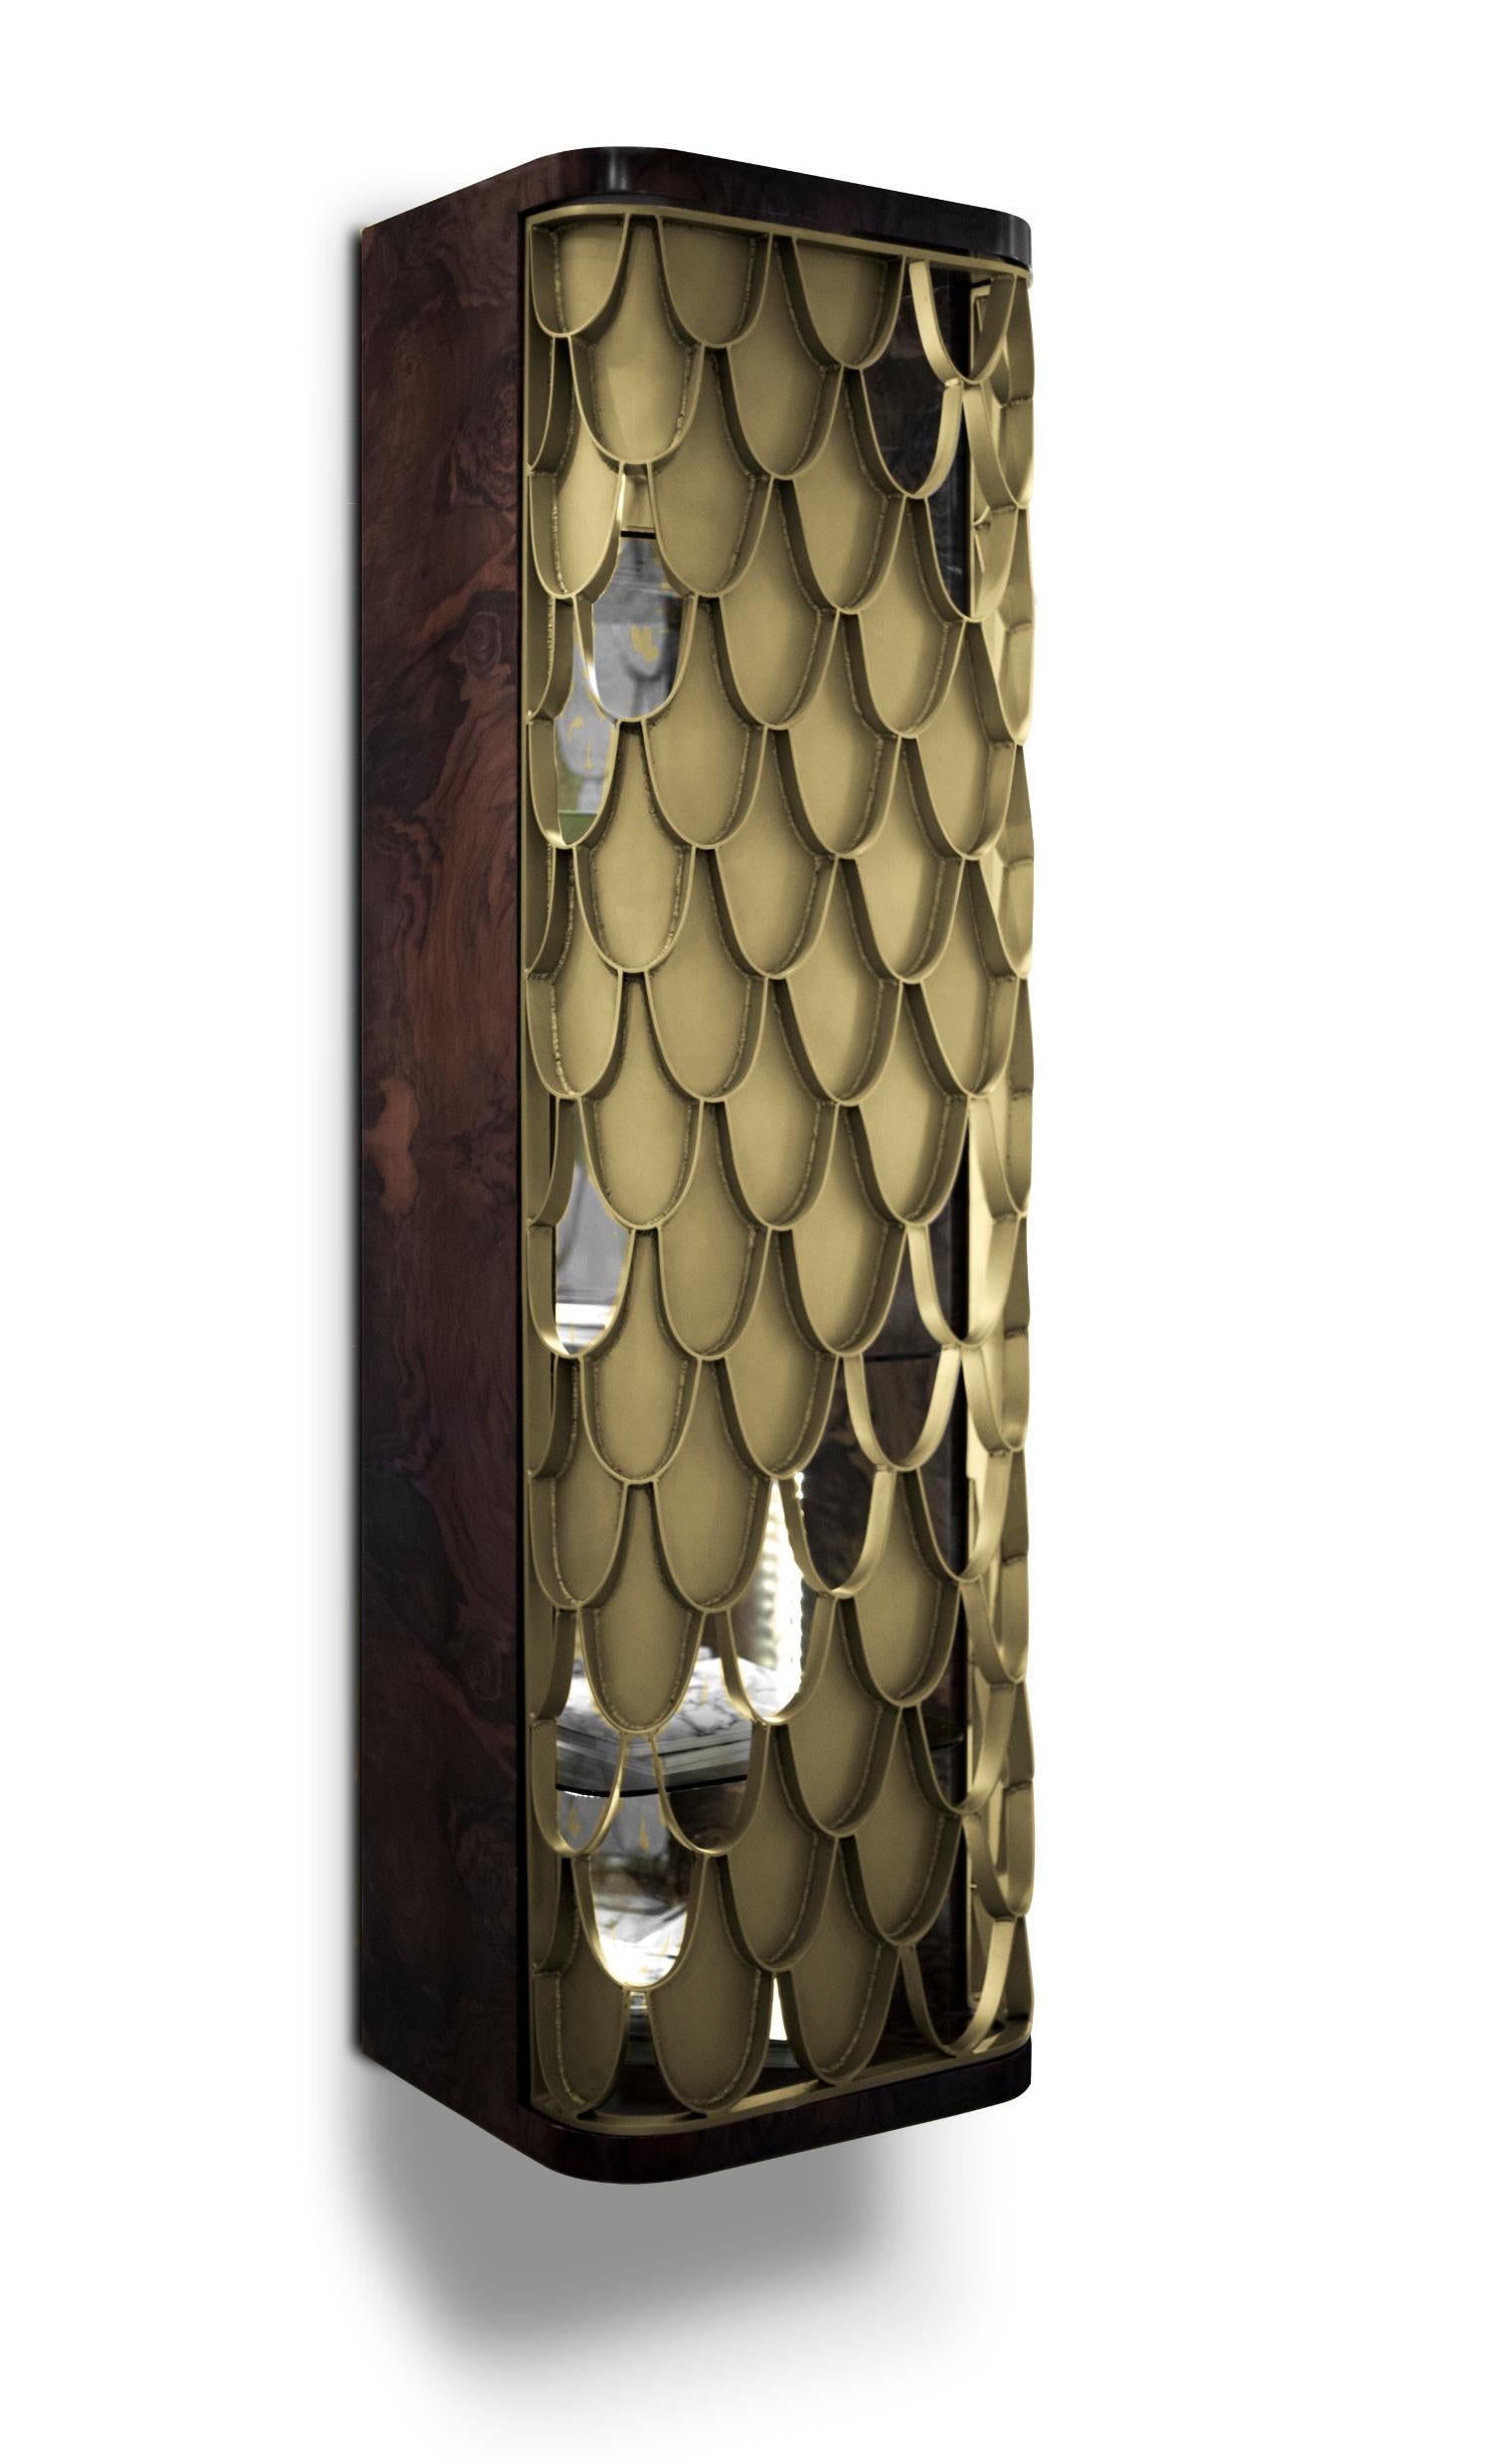 Koi Tall Storage is another product of our amazing Koi family. Finished with walnut root inside and out and aged brass carps this product is perfect to display your finest accessories. Discreet yet exquisite, this tall storage provides you